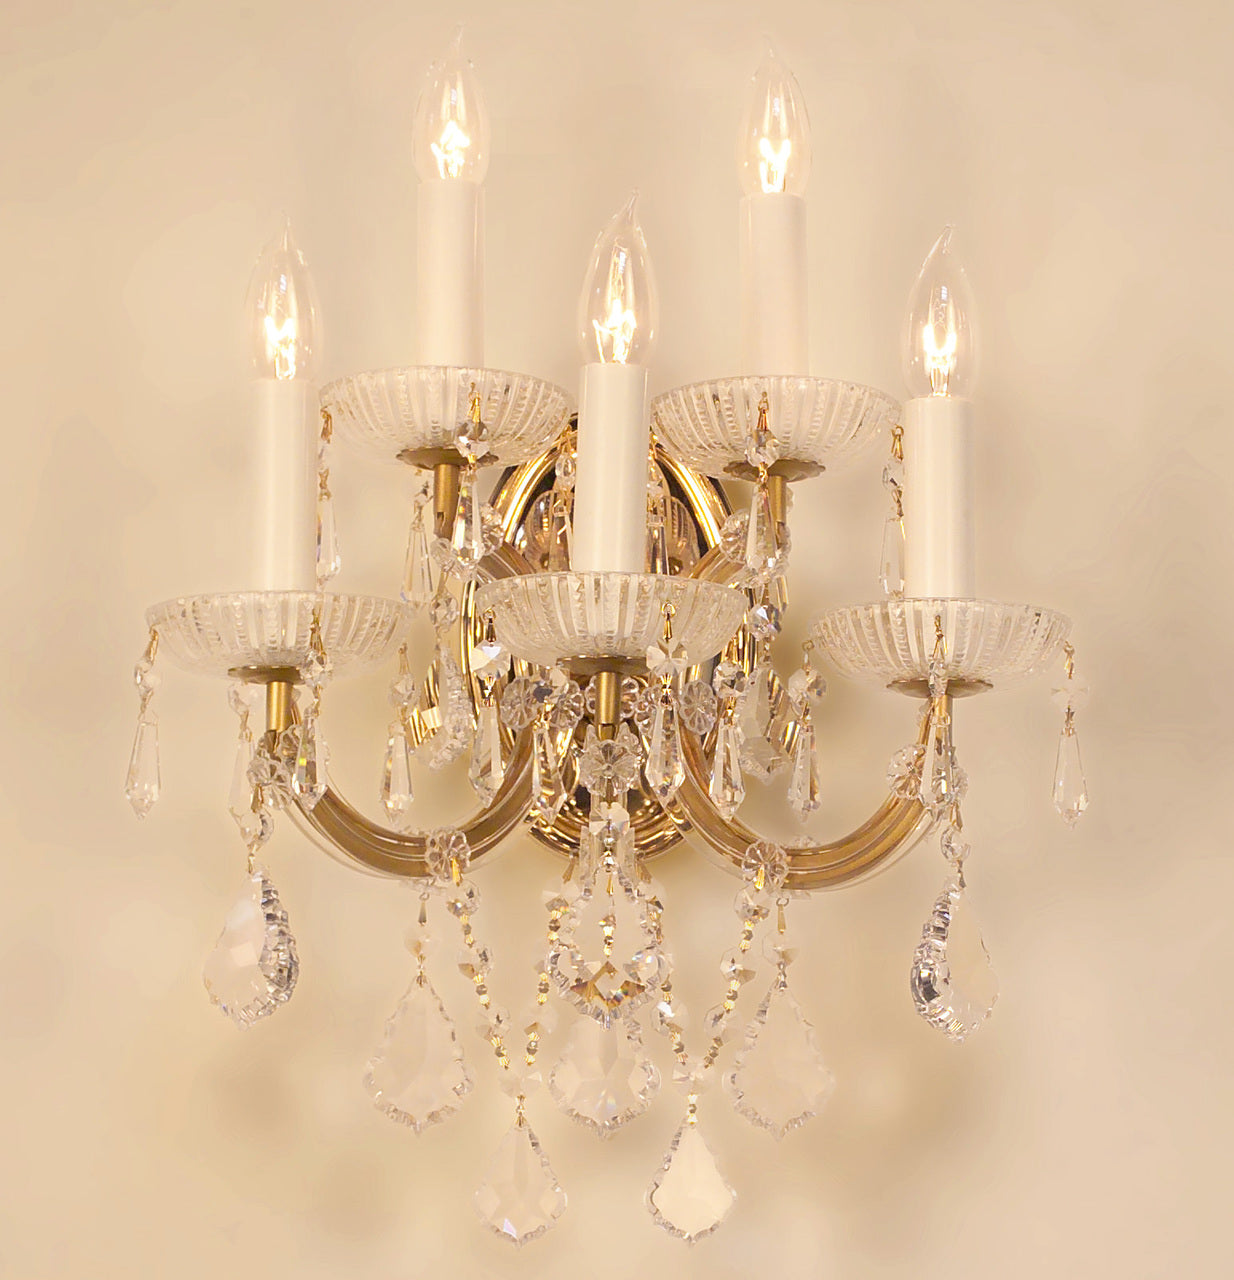 Classic Lighting 8105 OWG C Maria Theresa Traditional Crystal Wall Sconce in Olde World Gold (Imported from Italy)